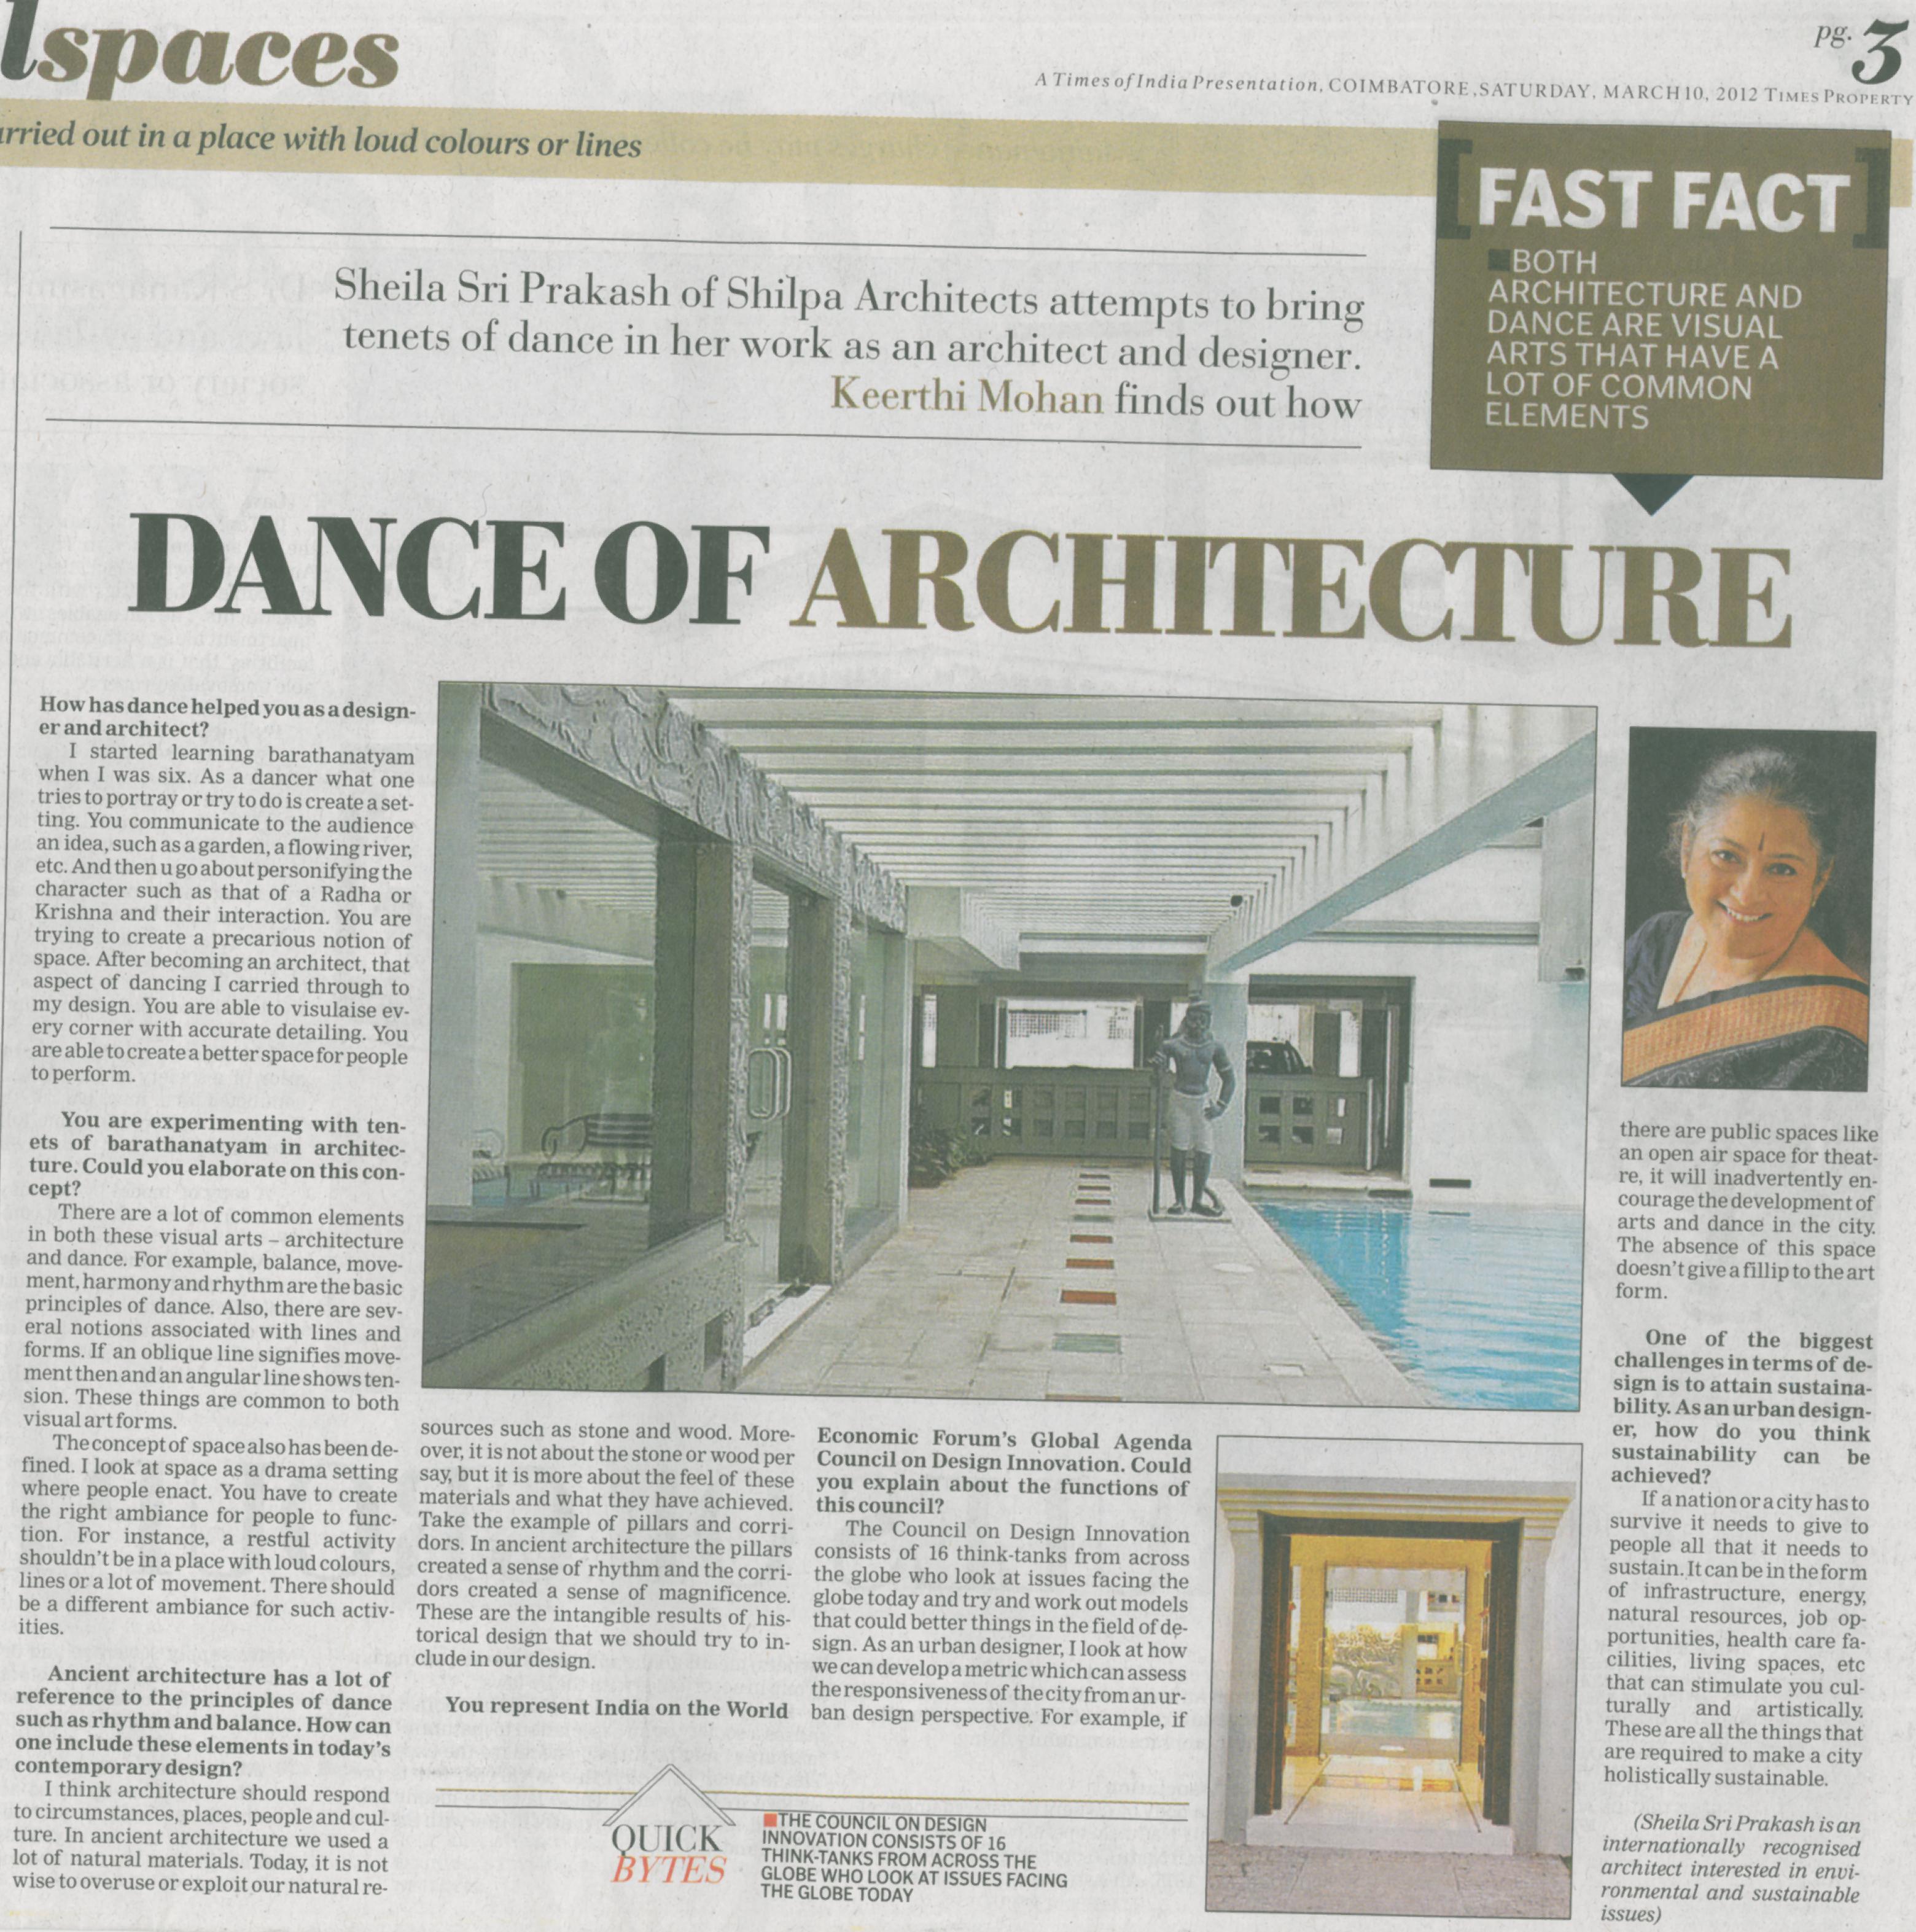 Times of India, 10 Mar 2012: DANCE OF ARCHITECTURE